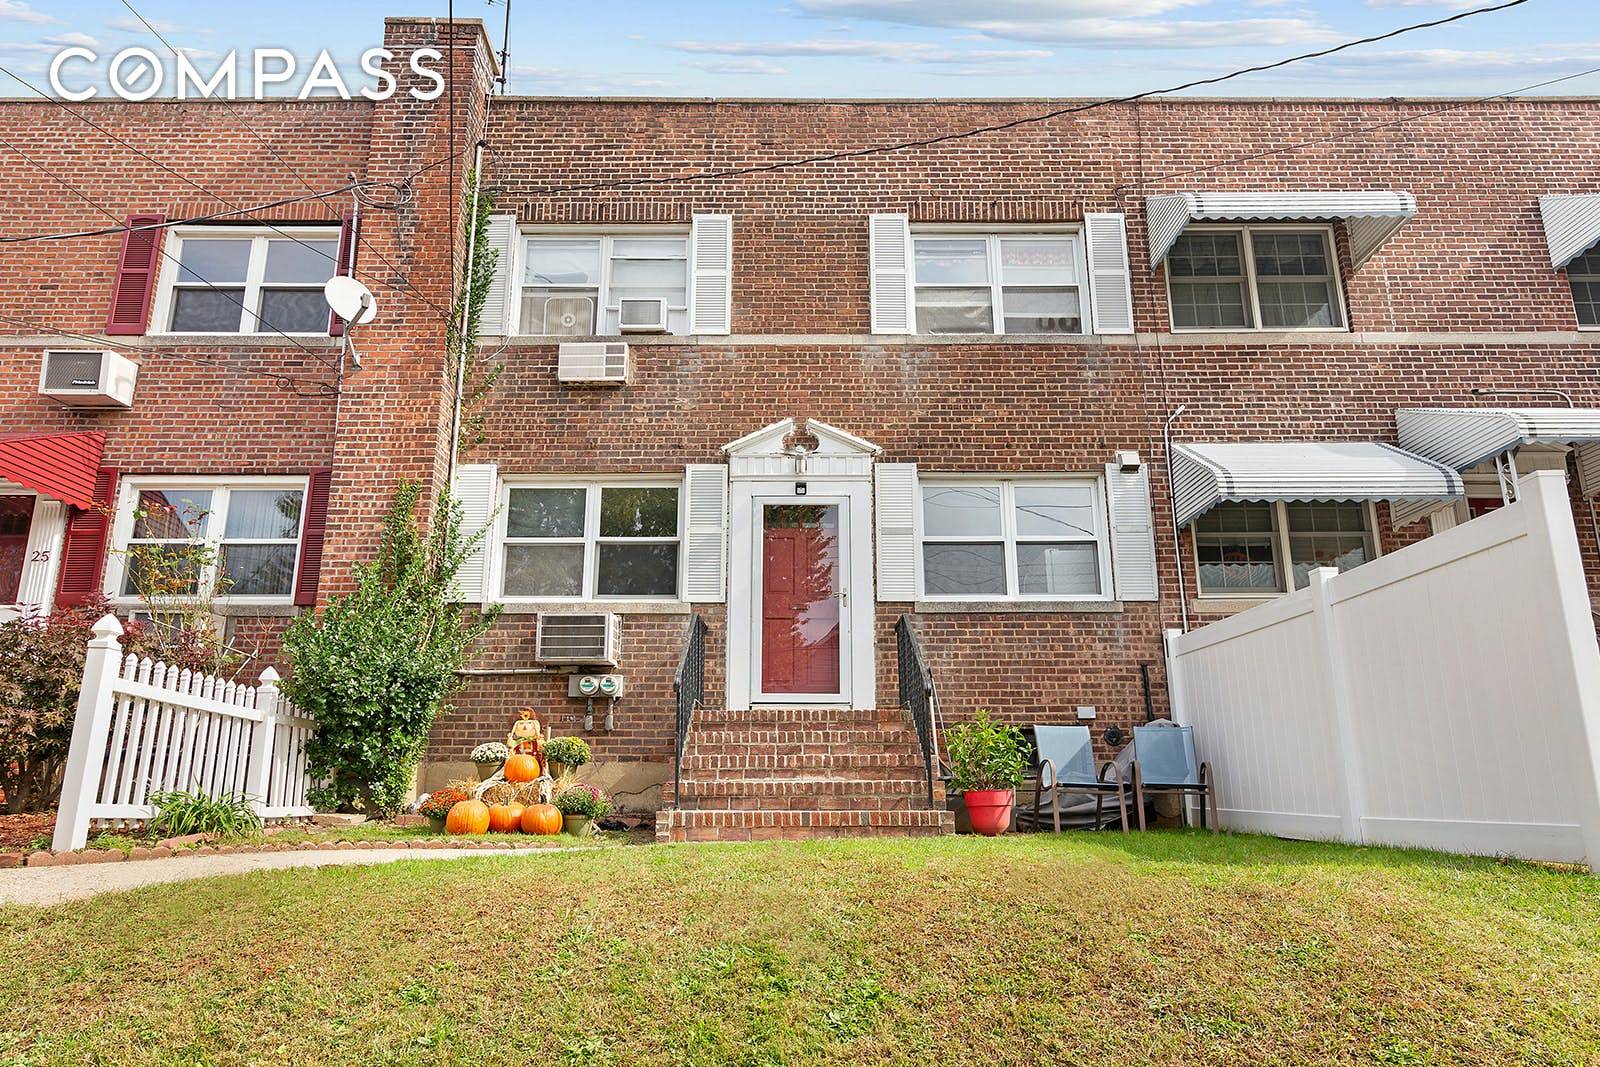 This handsome two family brick row house features clean, bright interiors and private outdoor space in Staten Island's convenient Castleton Corners neighborhood.